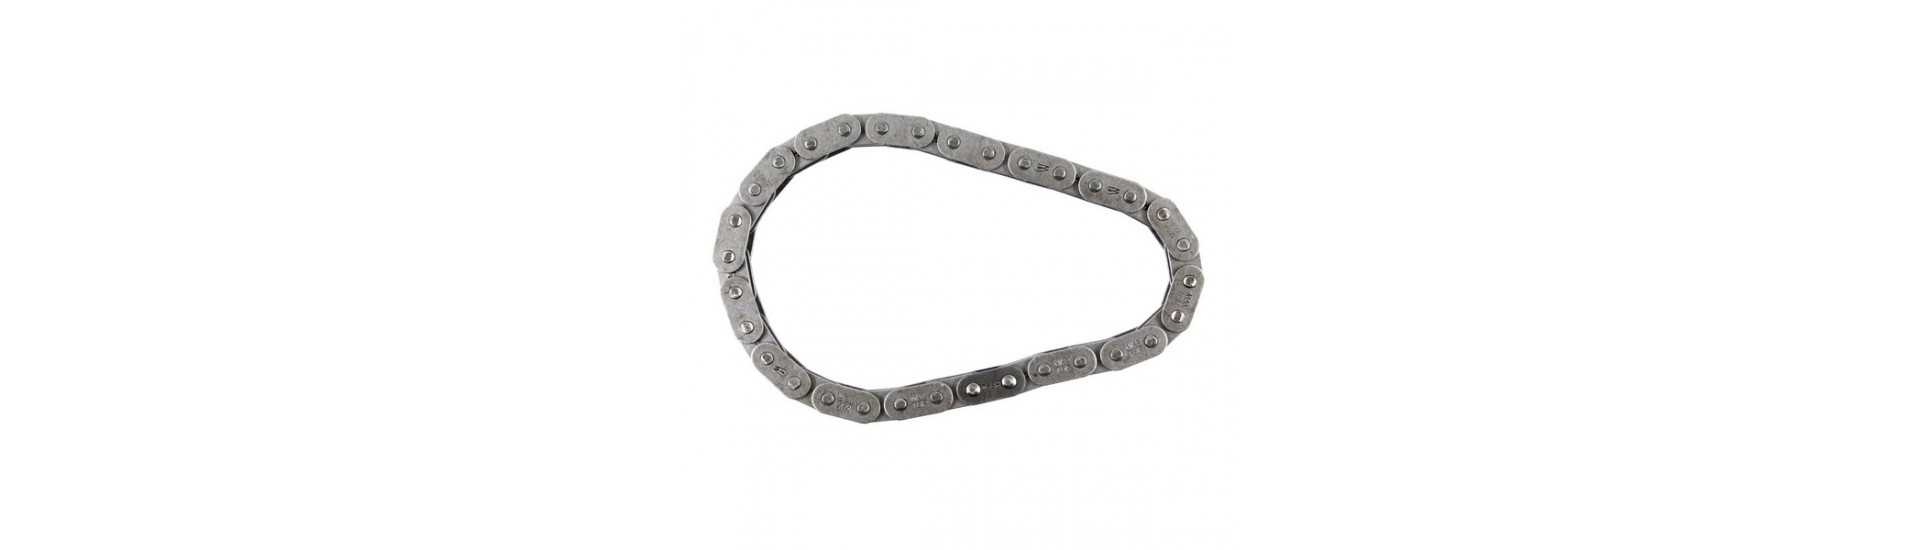 Speed box chain at best price for car without a permit